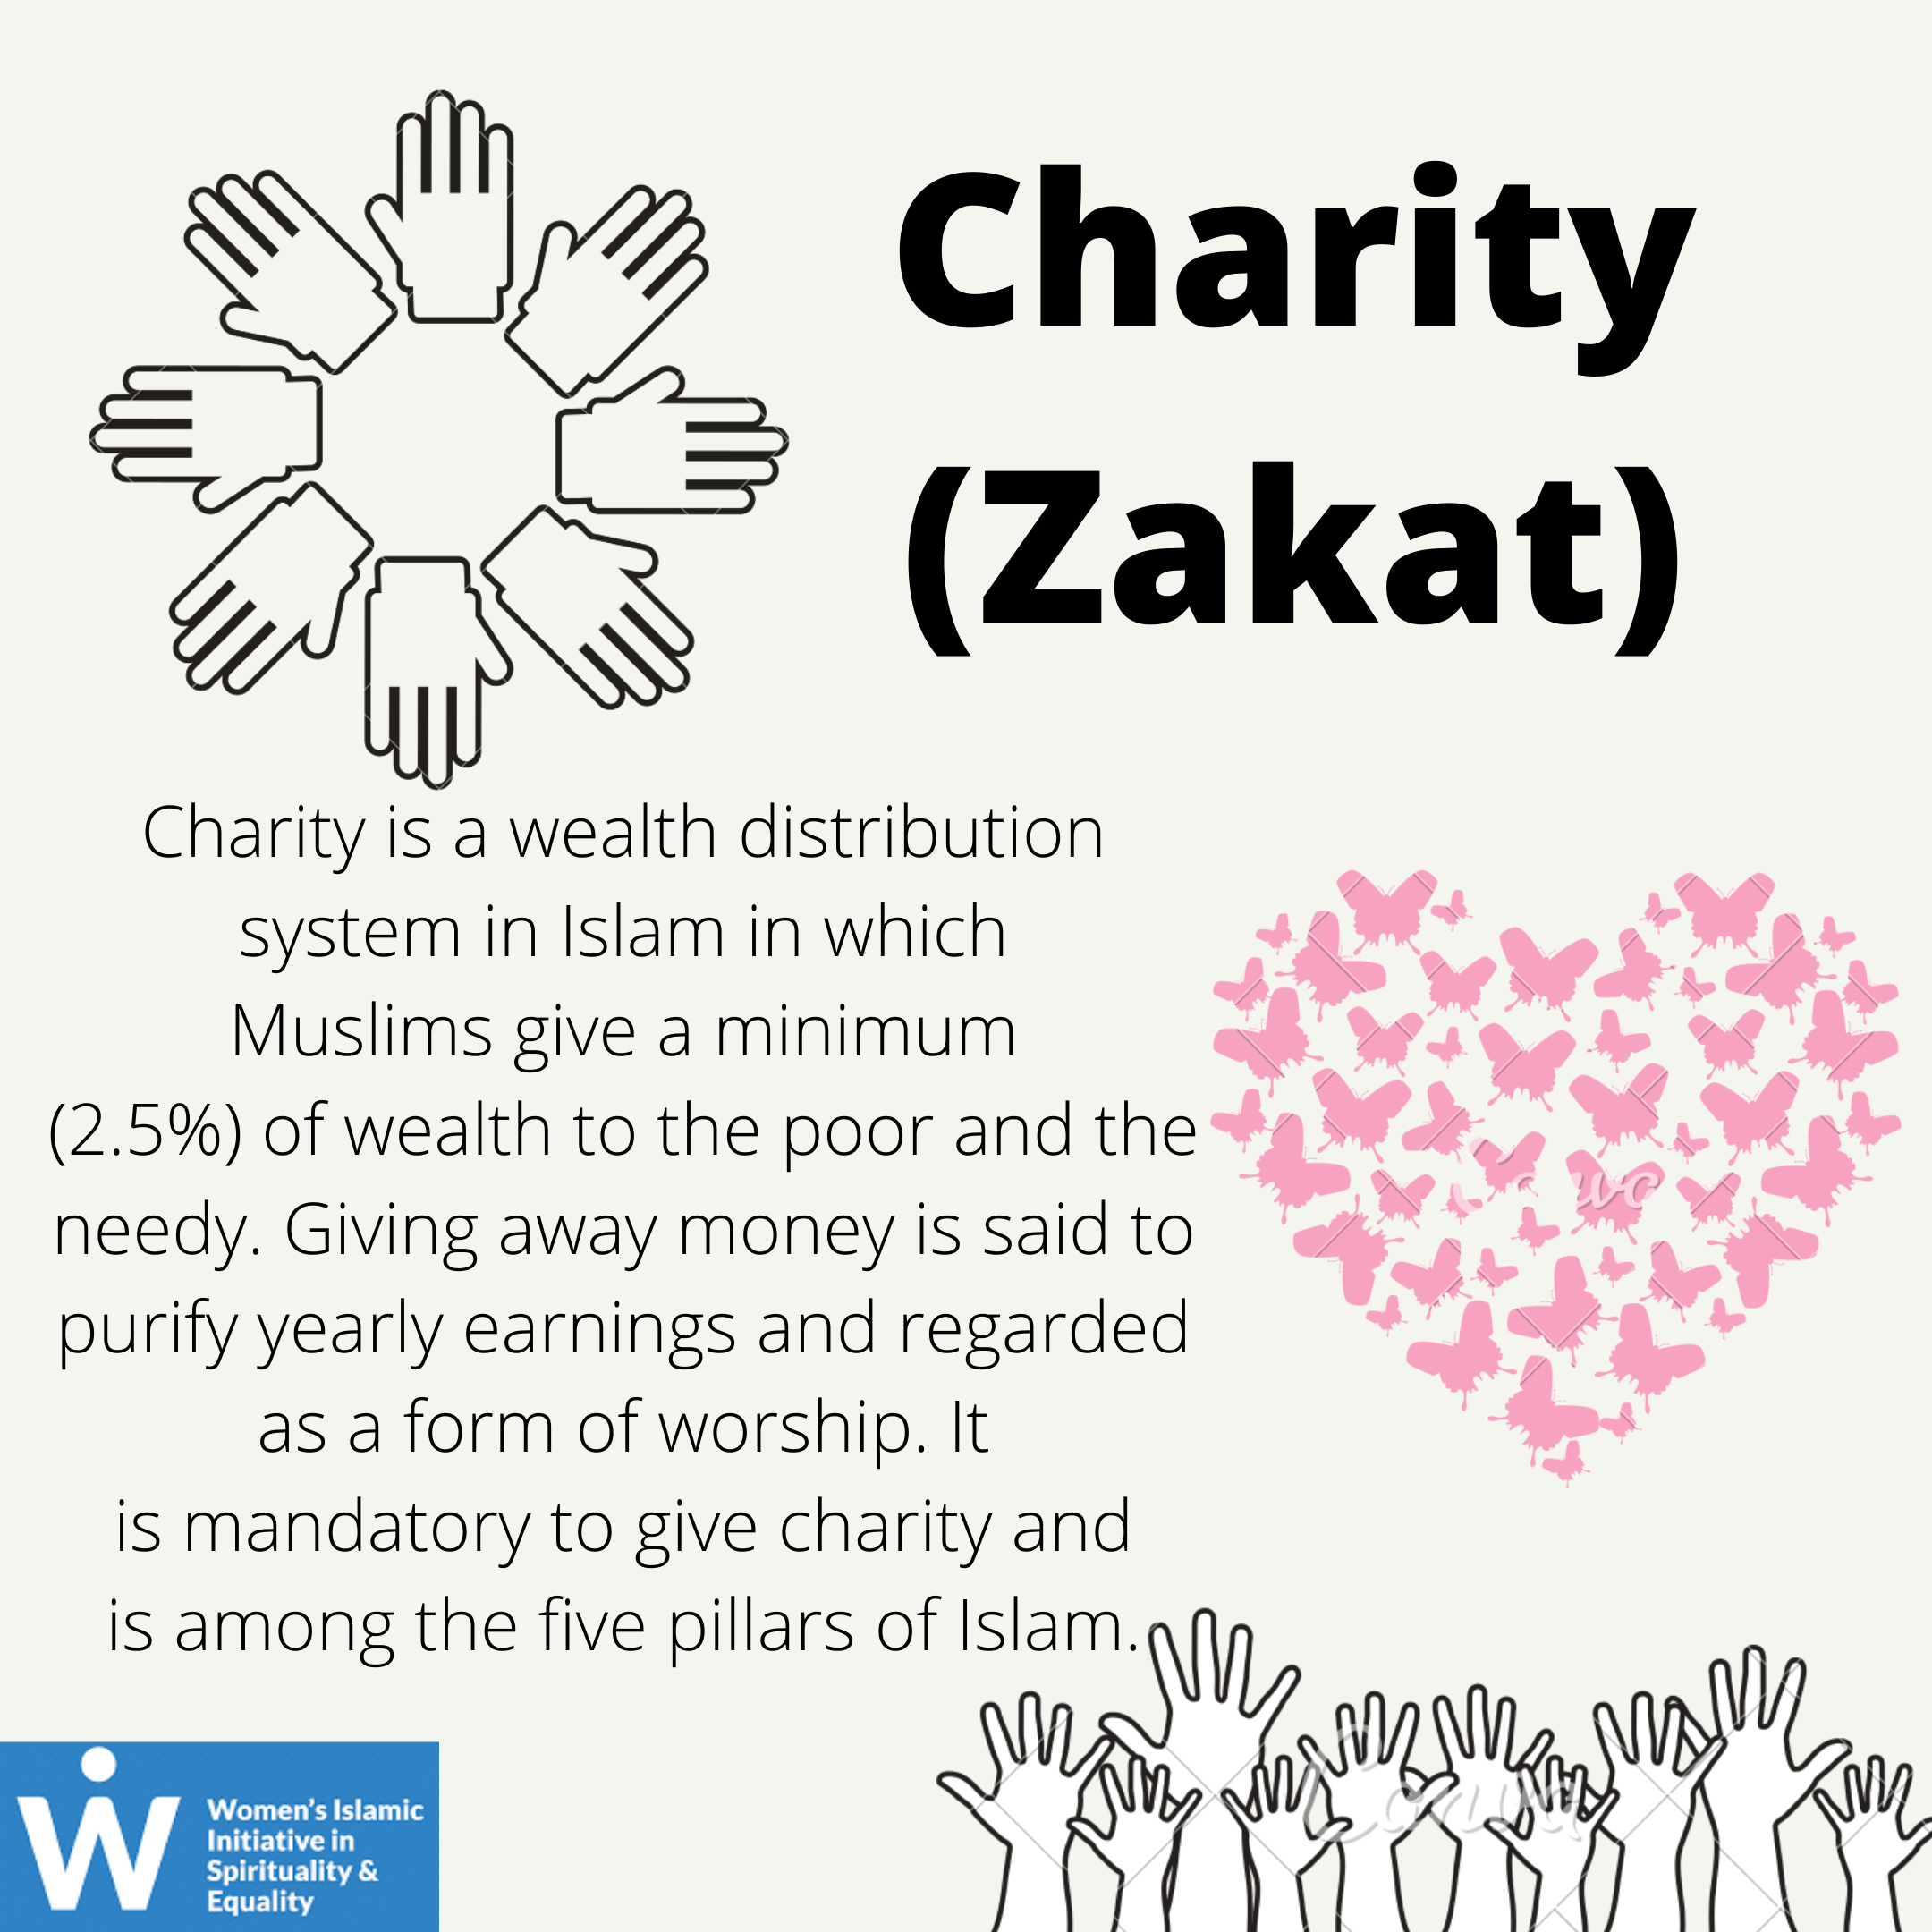 &quot;Charity (zakat): Charity is a wealth distribution system in Islam in which Muslims give a minimum (2.5%) of wealth to the poor and the needy. Giving away money is said to purify yearly earnings and regarded as a form of worship. It is mandatory to give charity and is among the five pillars of Islam.&quot;